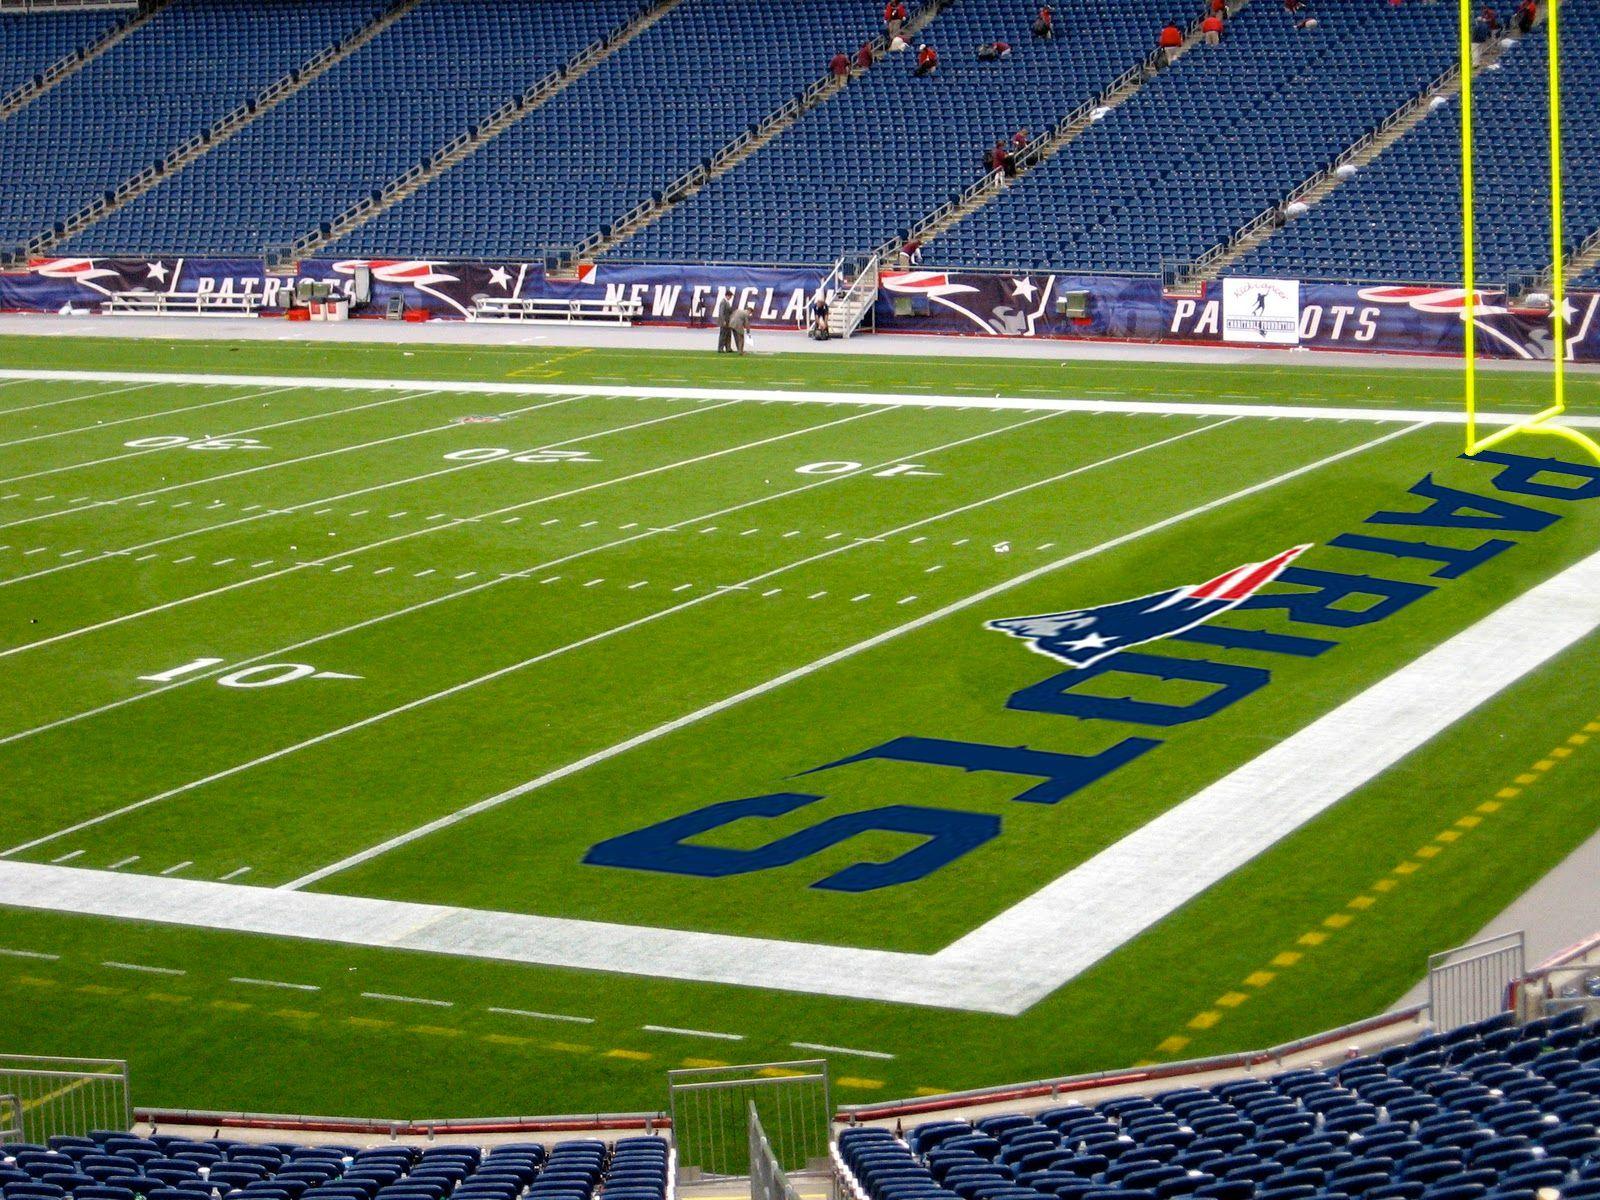 Patriots End Zone Logo - After seeing the new Endzone logo, I used Photohop to see how it